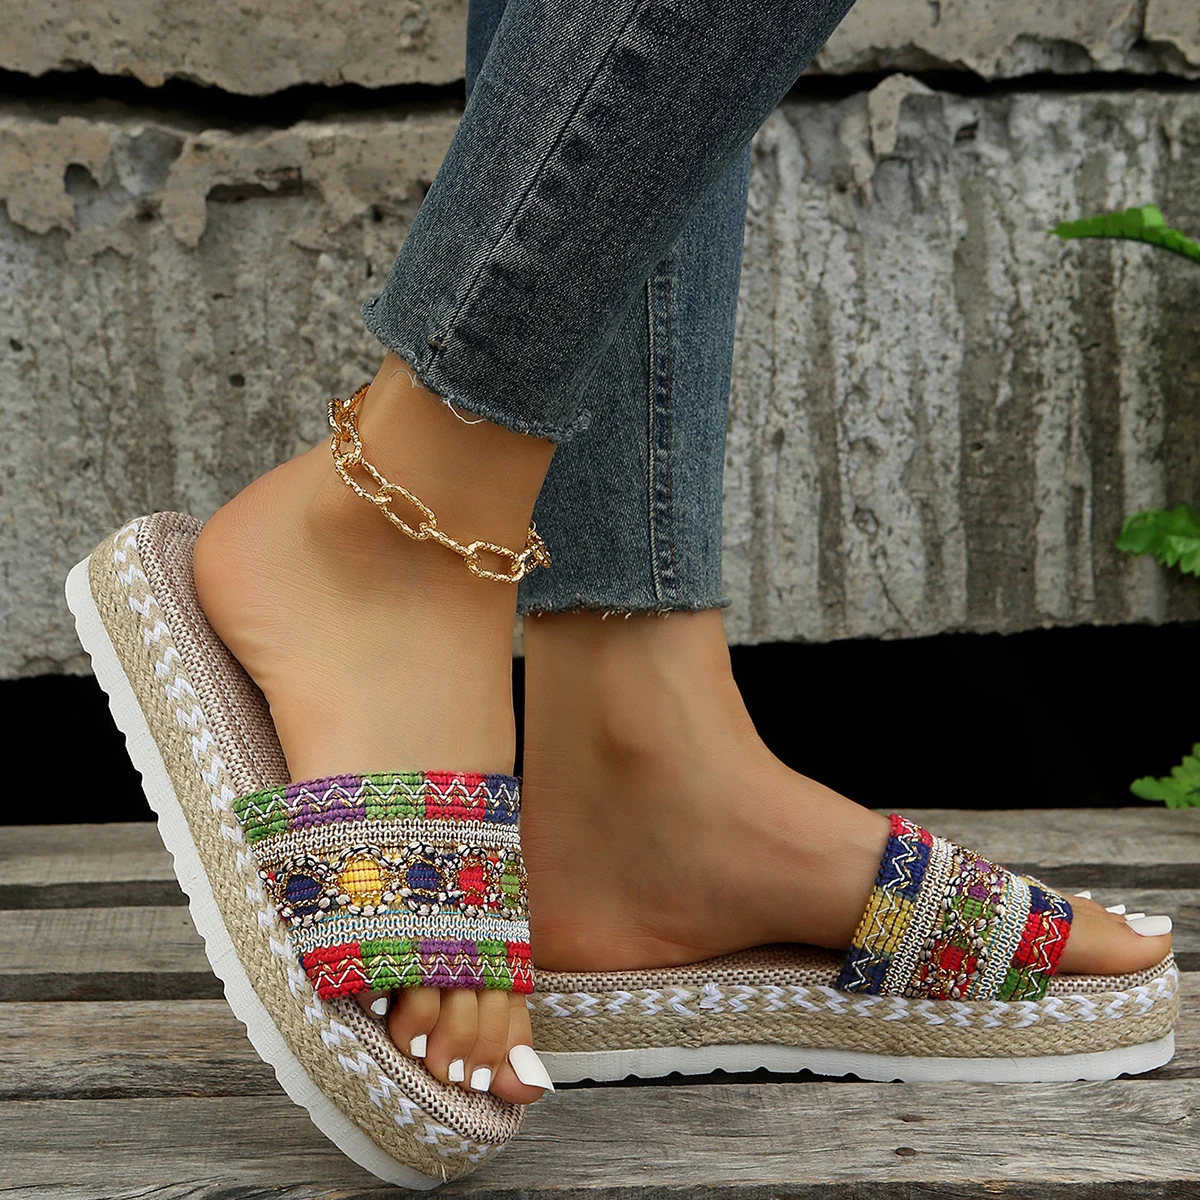 

Casual Thick Wedege Heel Slip-on Shoes Flats Vintage Ethnic Style Braide Geometry Beach Slipper Summer Peep Toe Women's Sandals